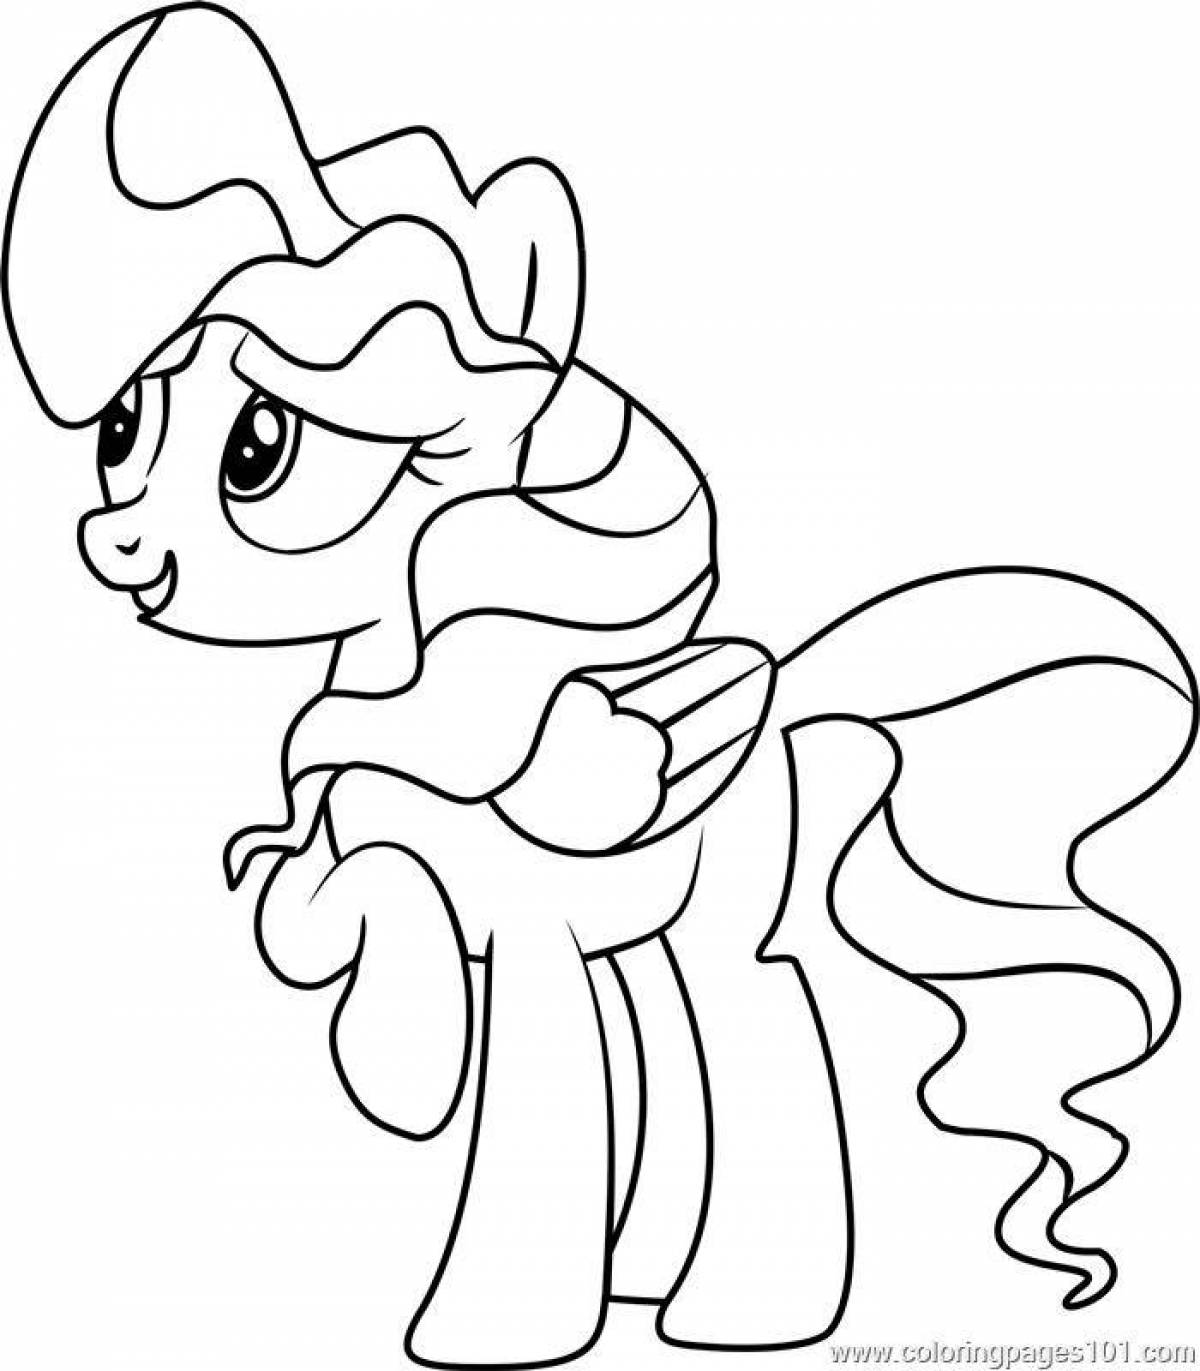 Coloring page adorable pony sleigh